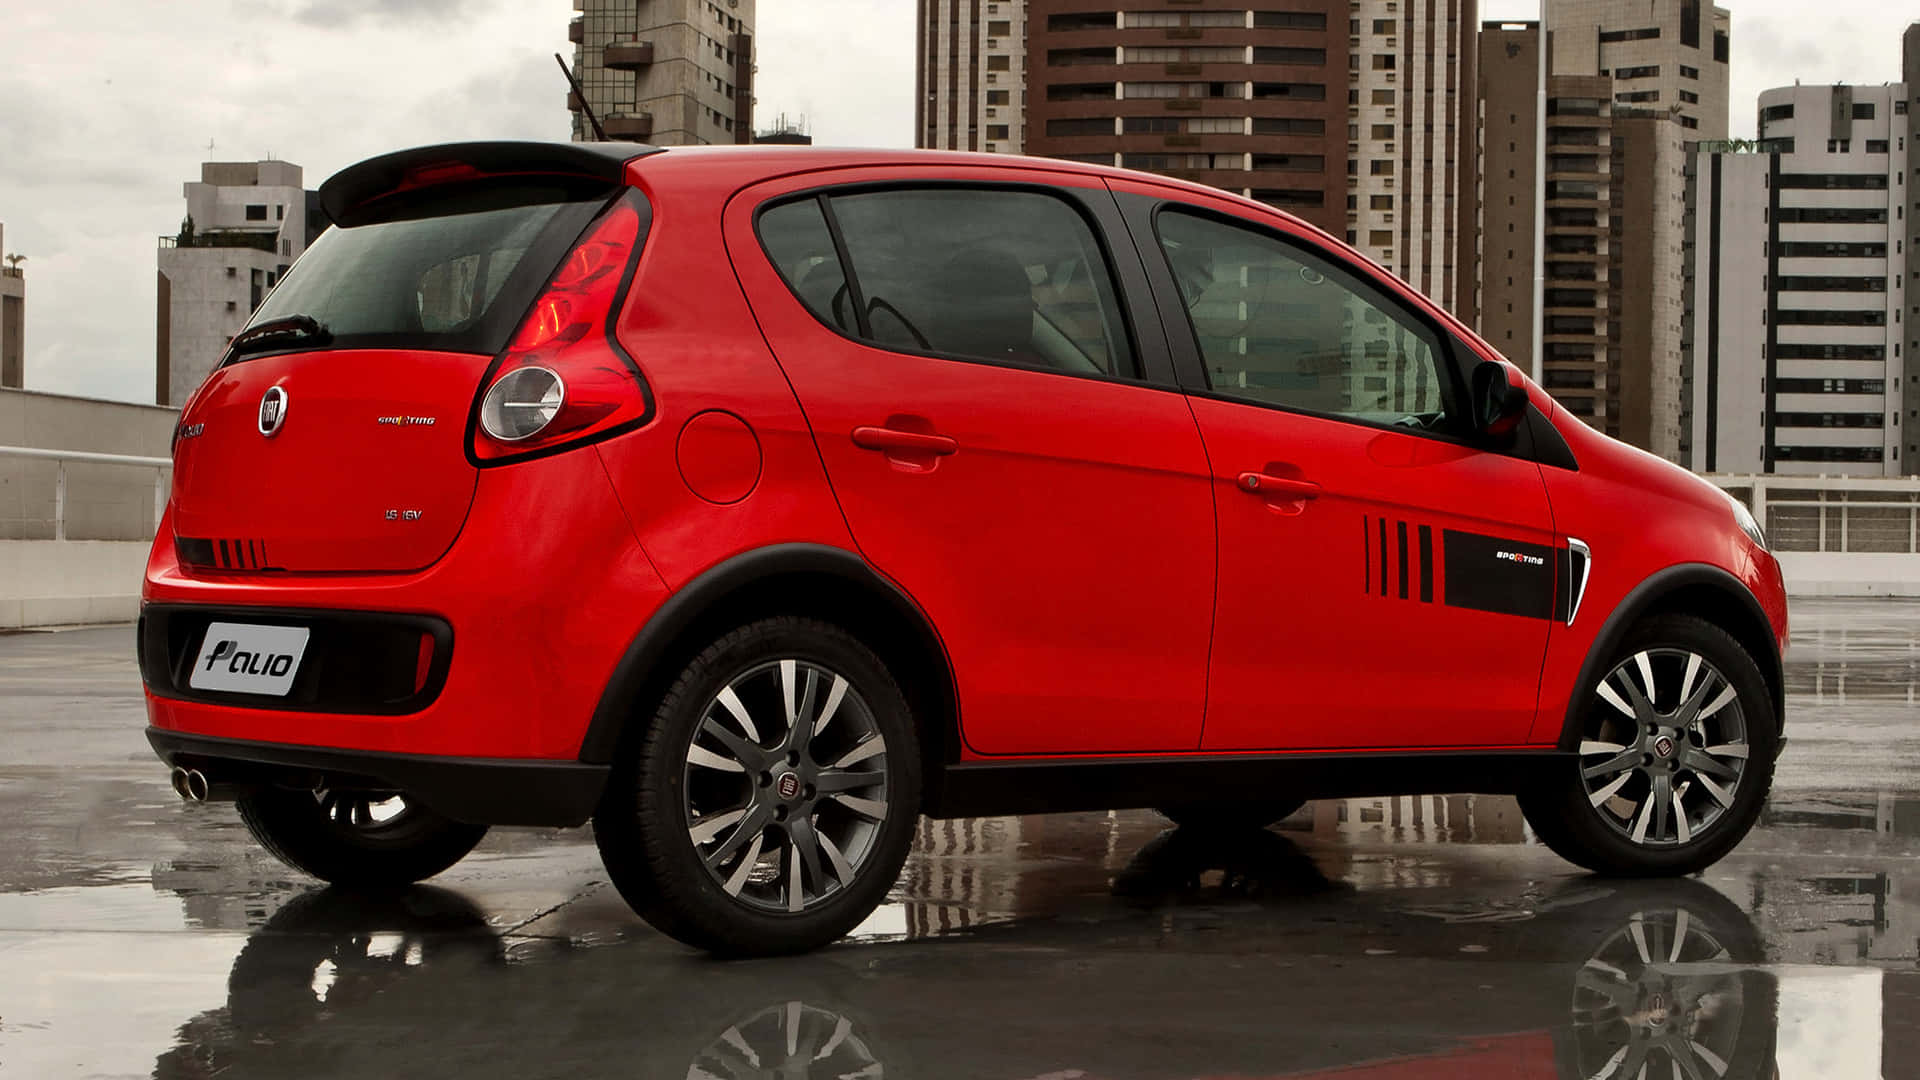 Fiat Palio: Experience Italian Style and Performance Wallpaper